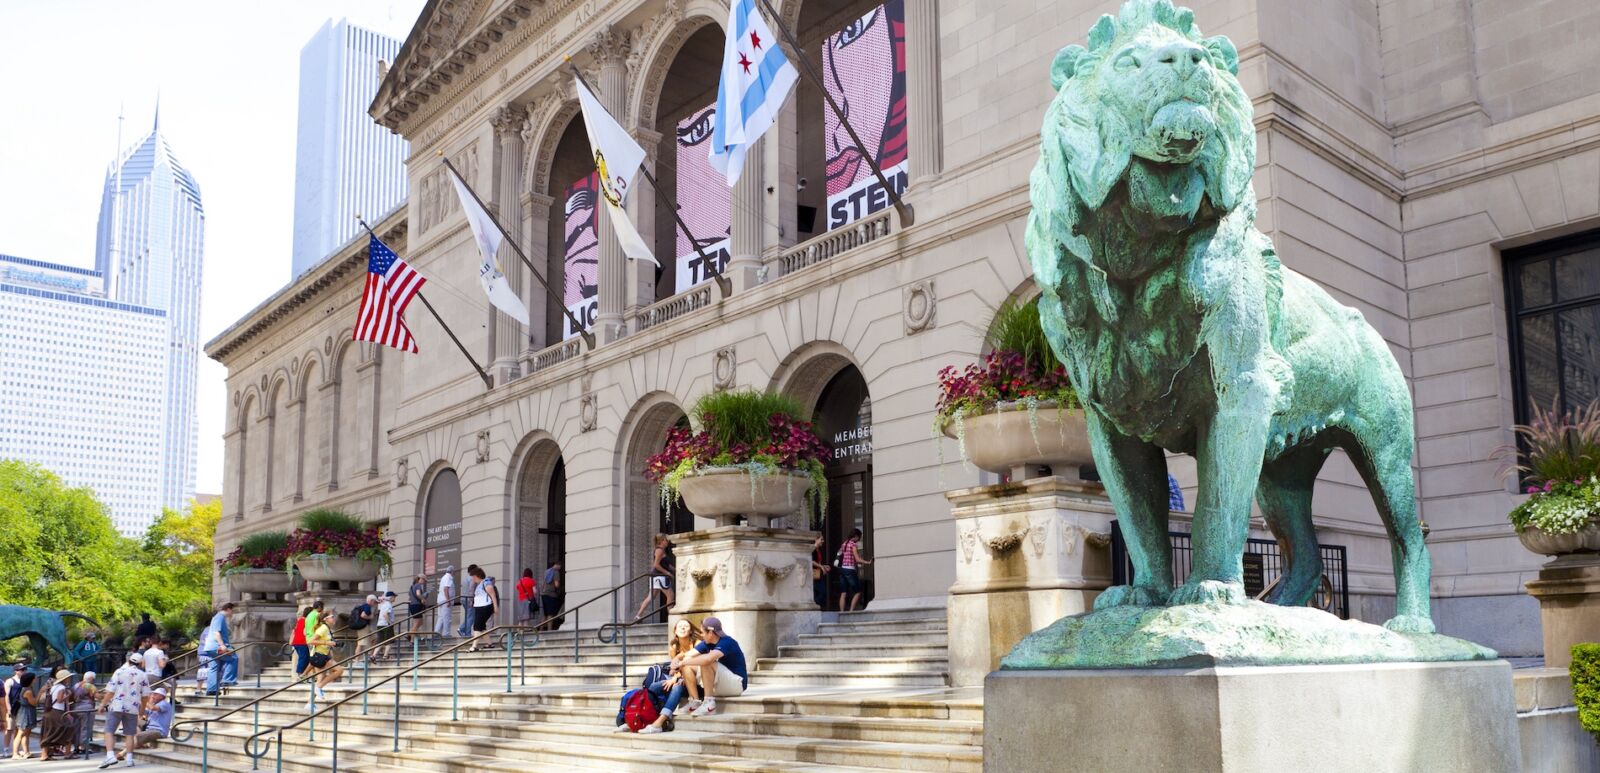 The Art Institute of Chicago has one of the world's most notable collections of Impressionist and Post-Impressionist art, on July 21, 2012 in Chicago, Illinois, USA. Photo via Shutterstock.